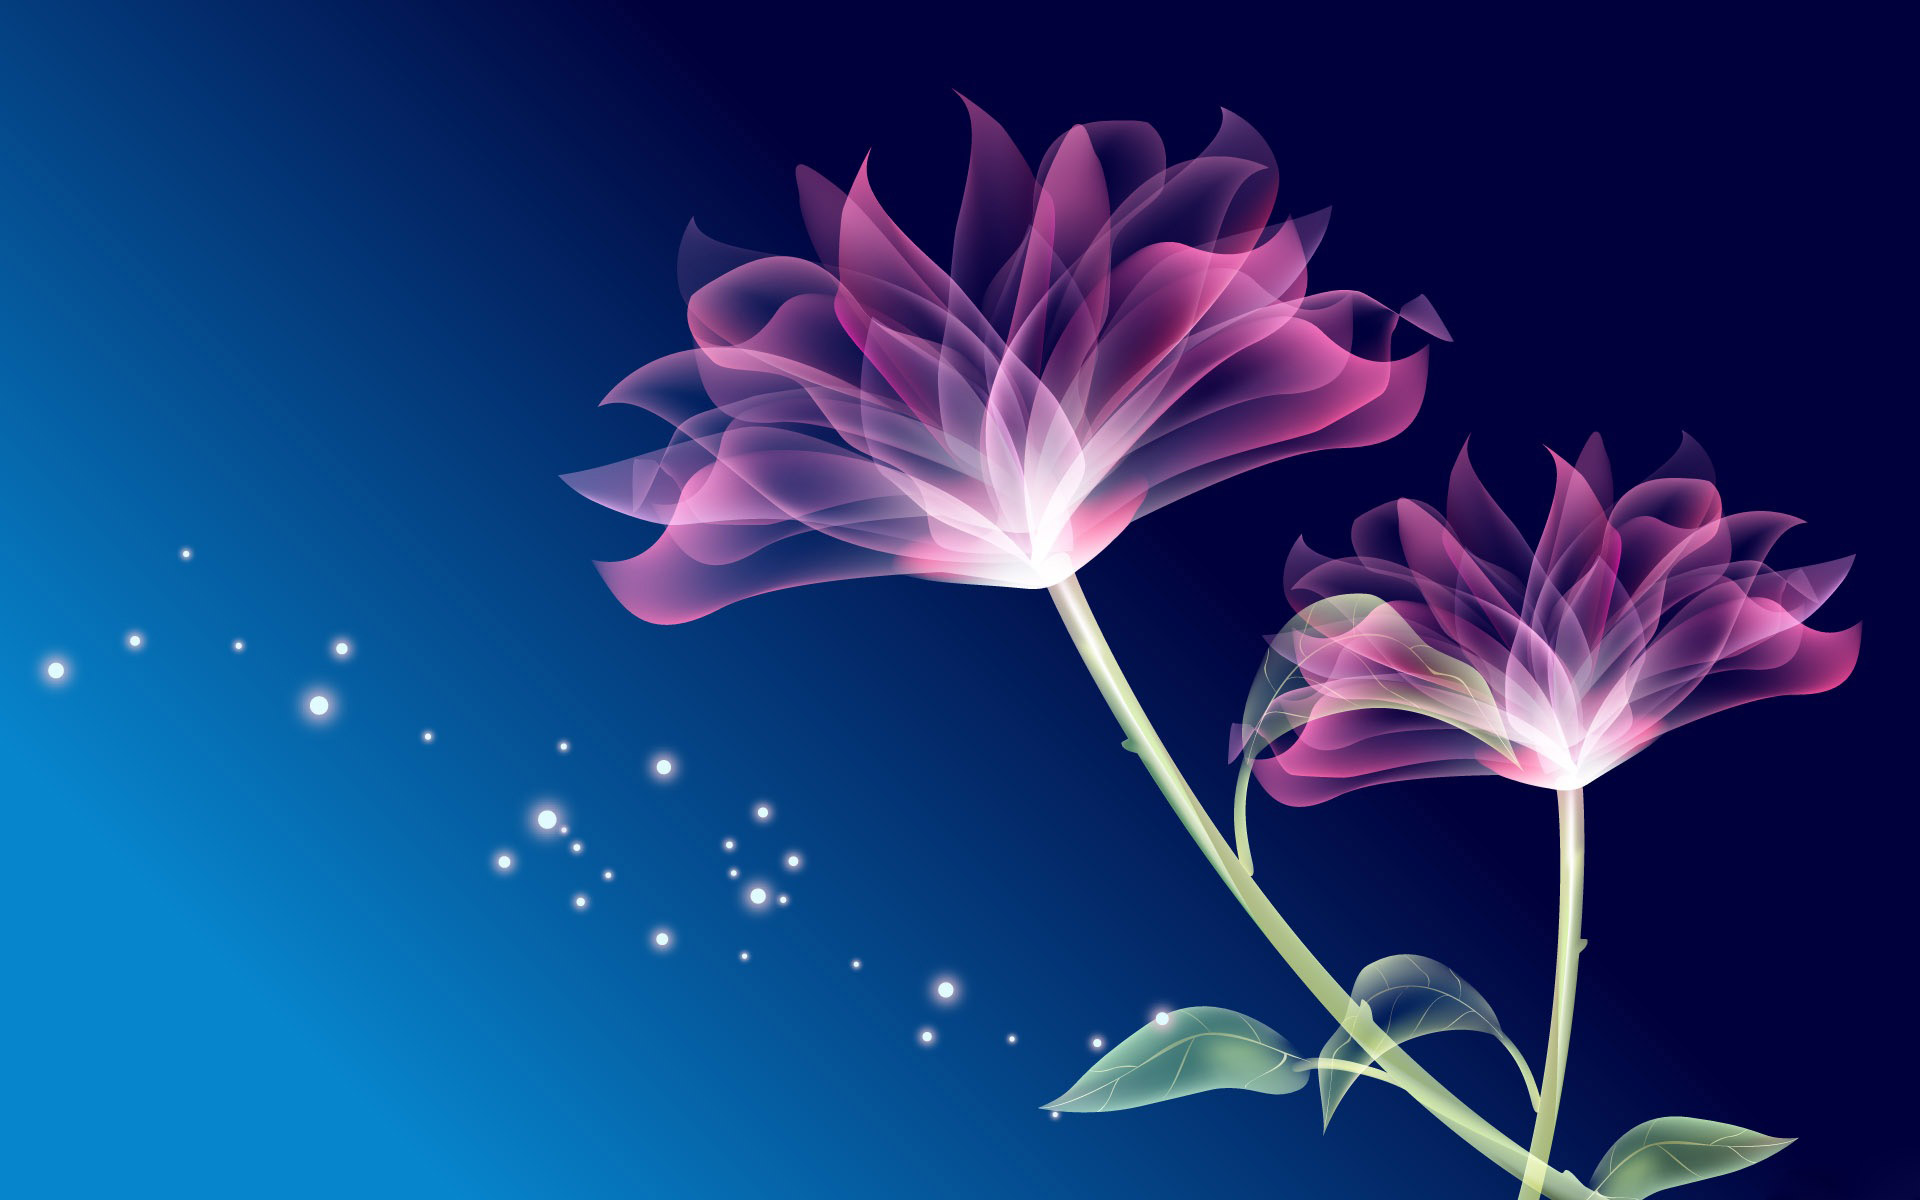 Abstract Flower Background HD Wallpaper In Imageci